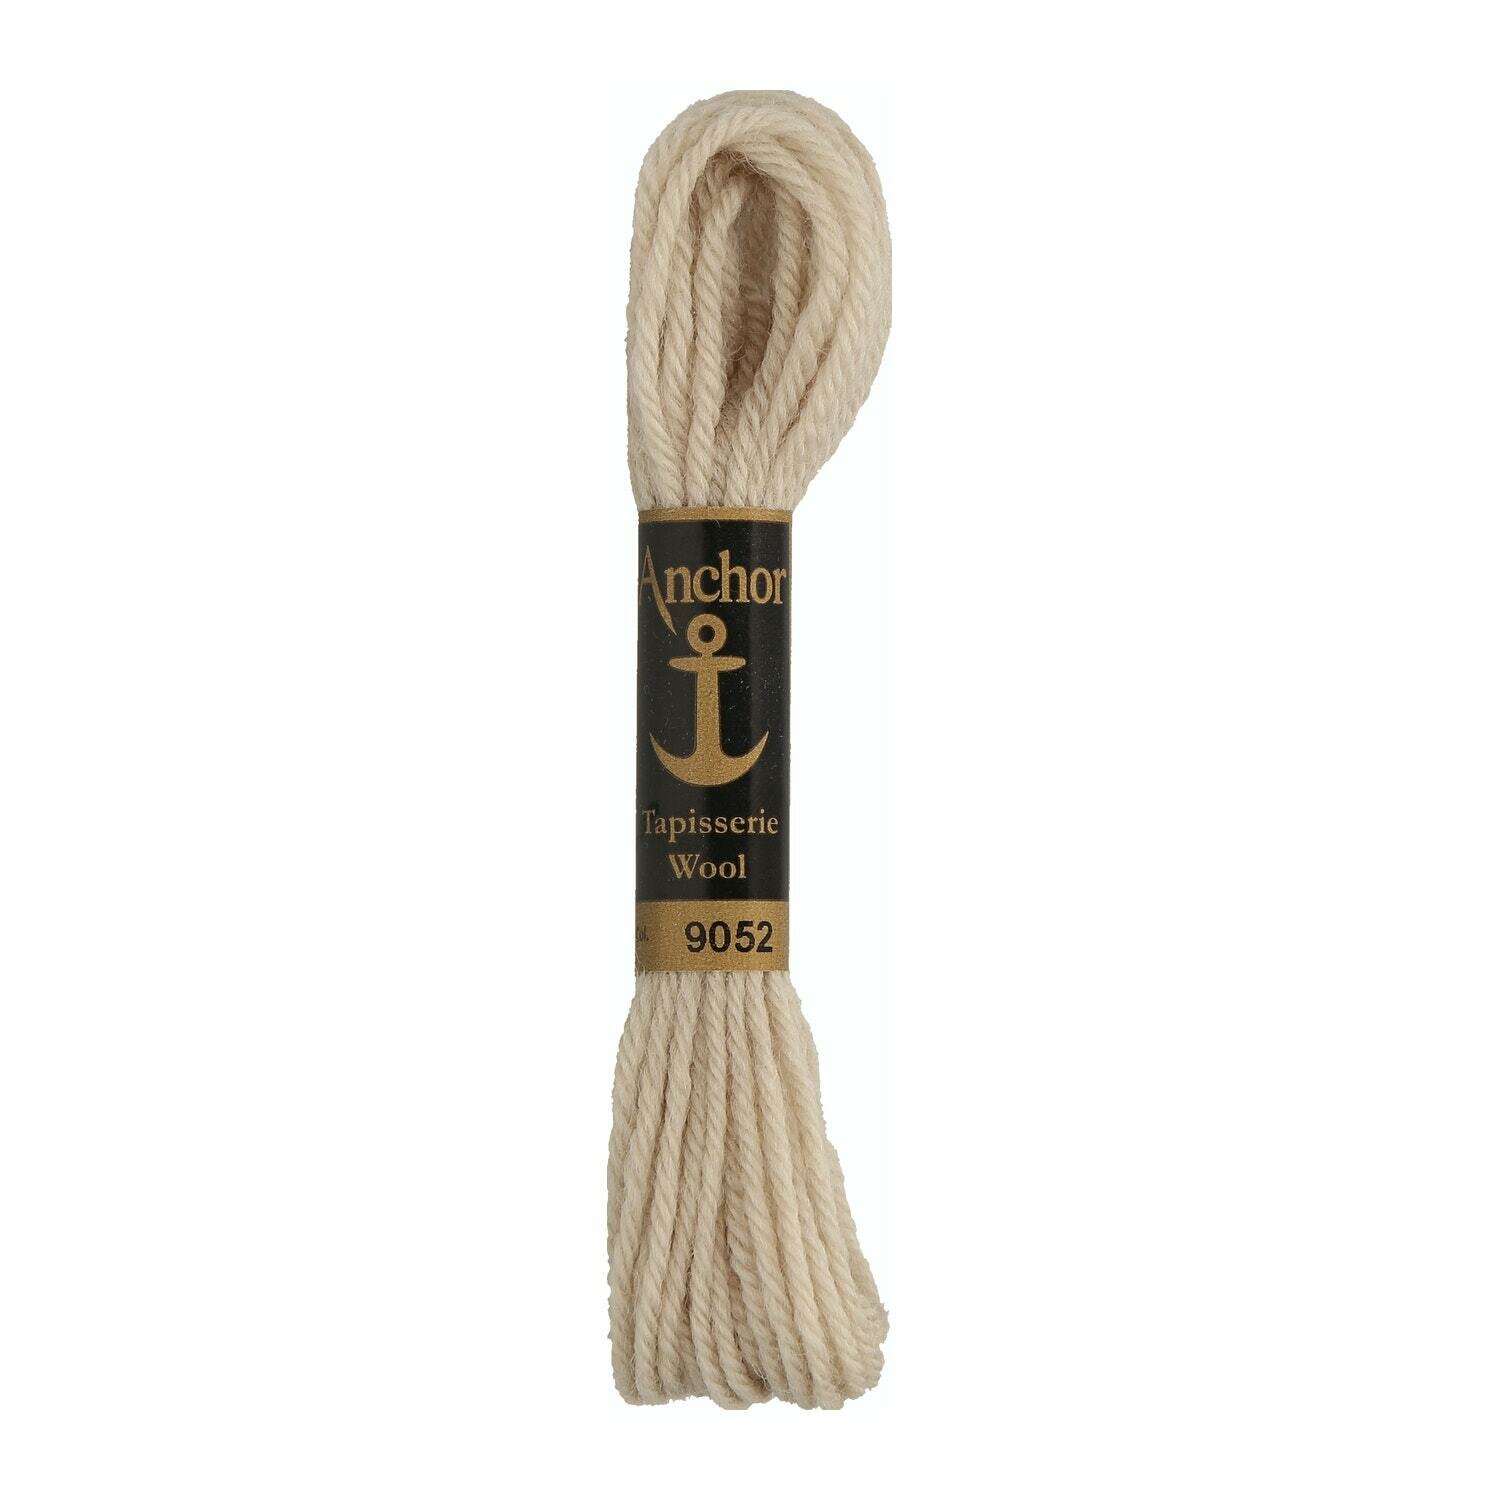 Anchor Tapisserie Wool # 09052